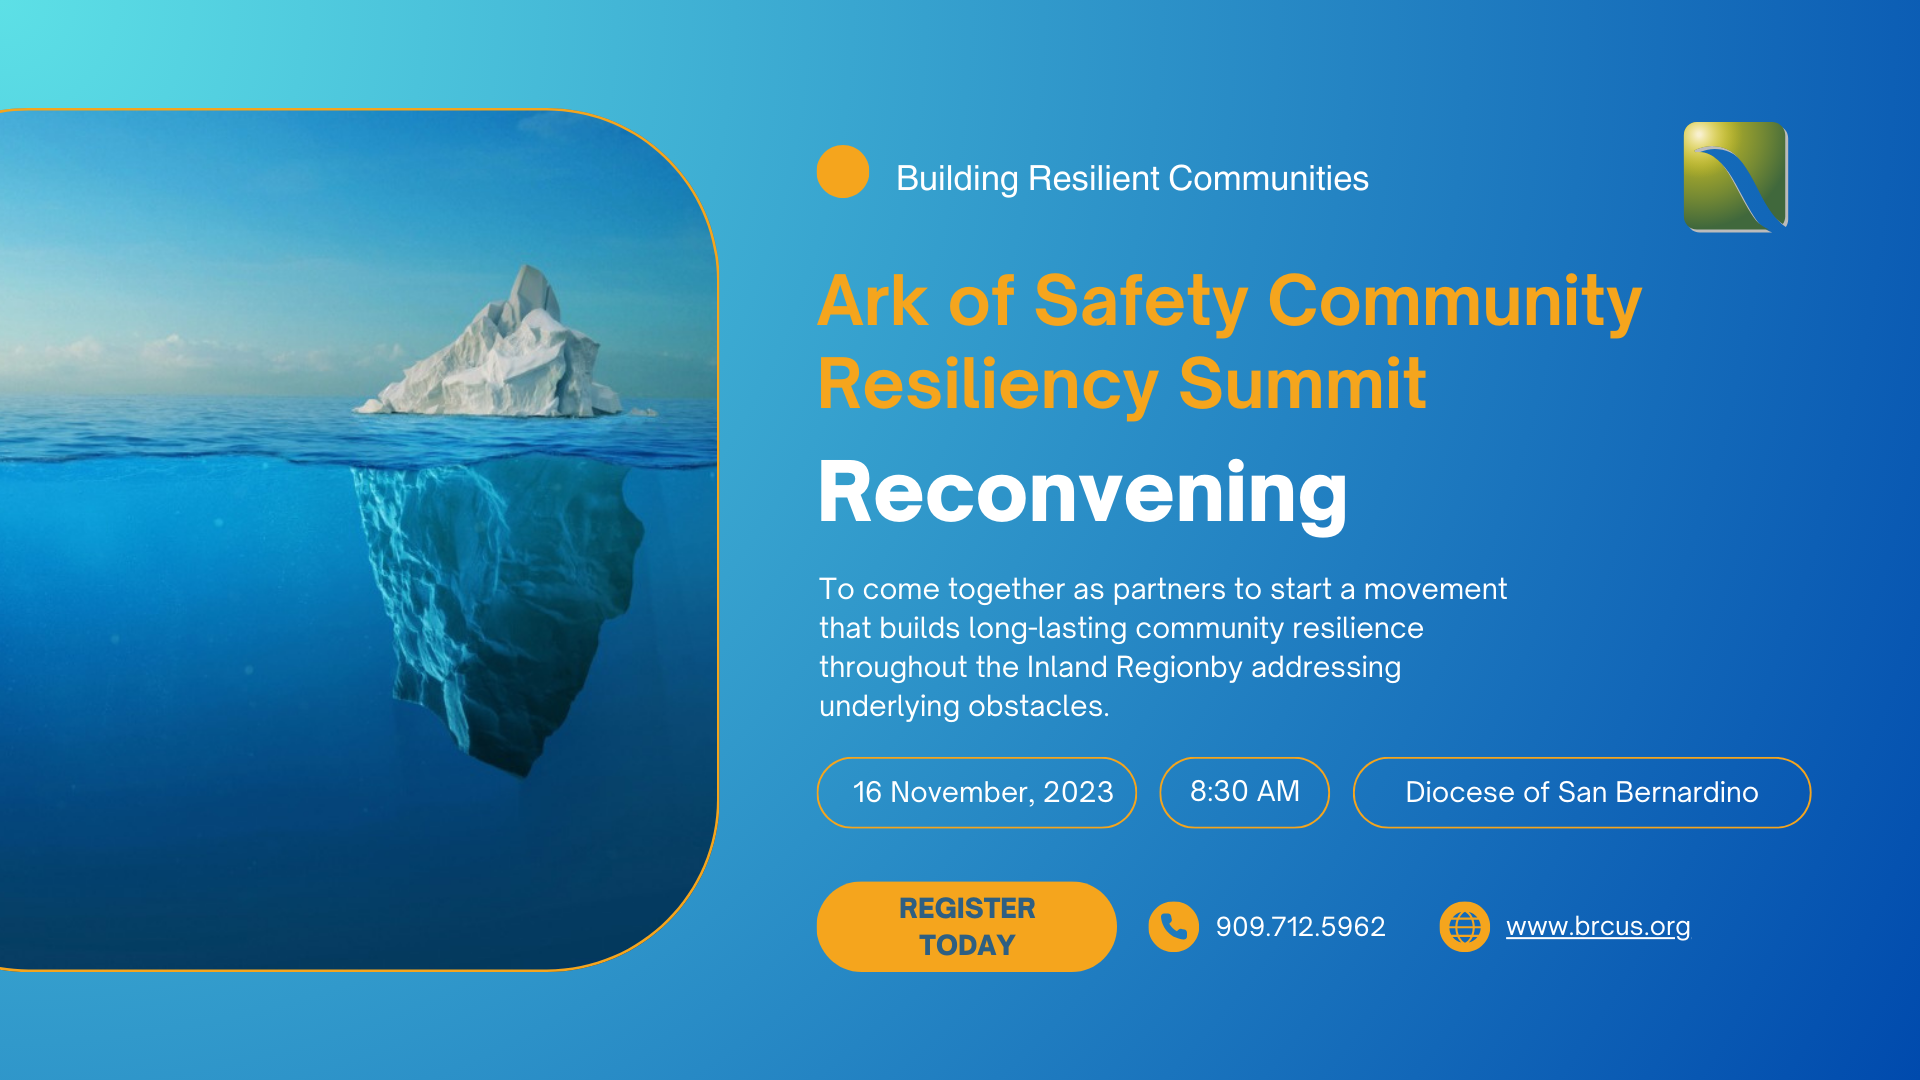 Ark of Safety October Reconvening Summit Save the date flyer and registration link